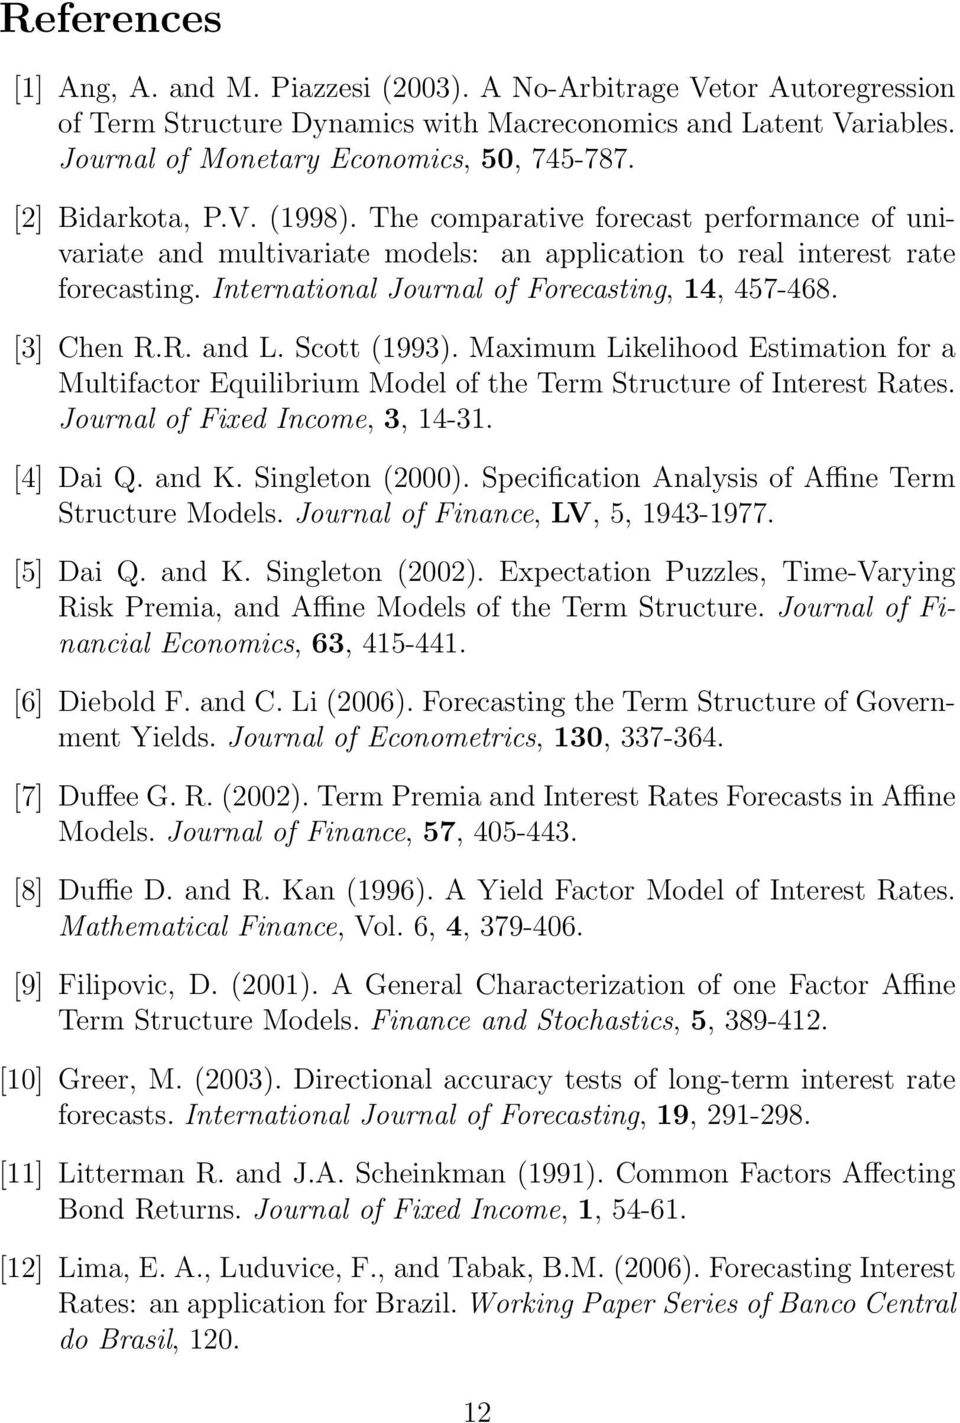 International Journal of Forecasting, 14, 457-468. [3] Chen R.R. and L. Scott (1993). Maximum Likelihood Estimation for a Multifactor Equilibrium Model of the Term Structure of Interest Rates.